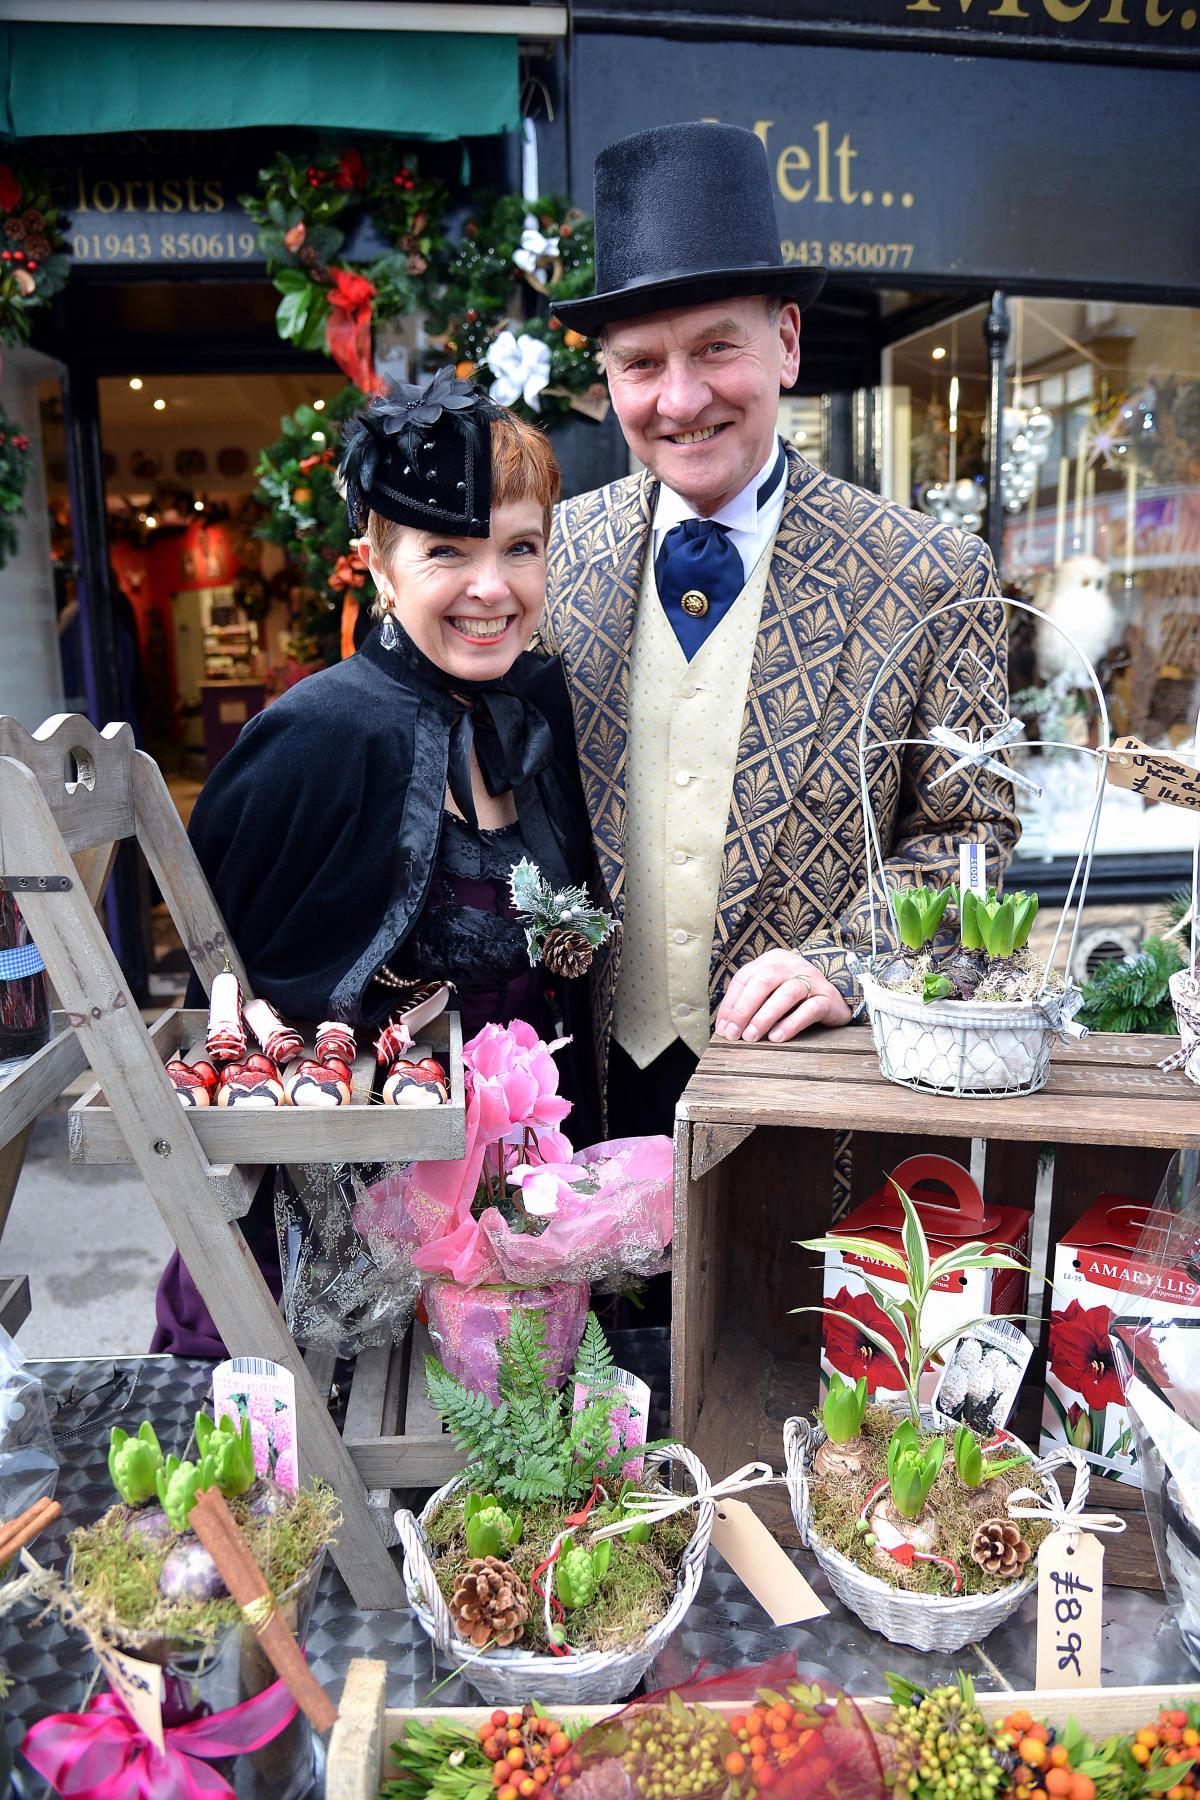 John and Fiona Jane Bell from the Academy Florists show off their wares